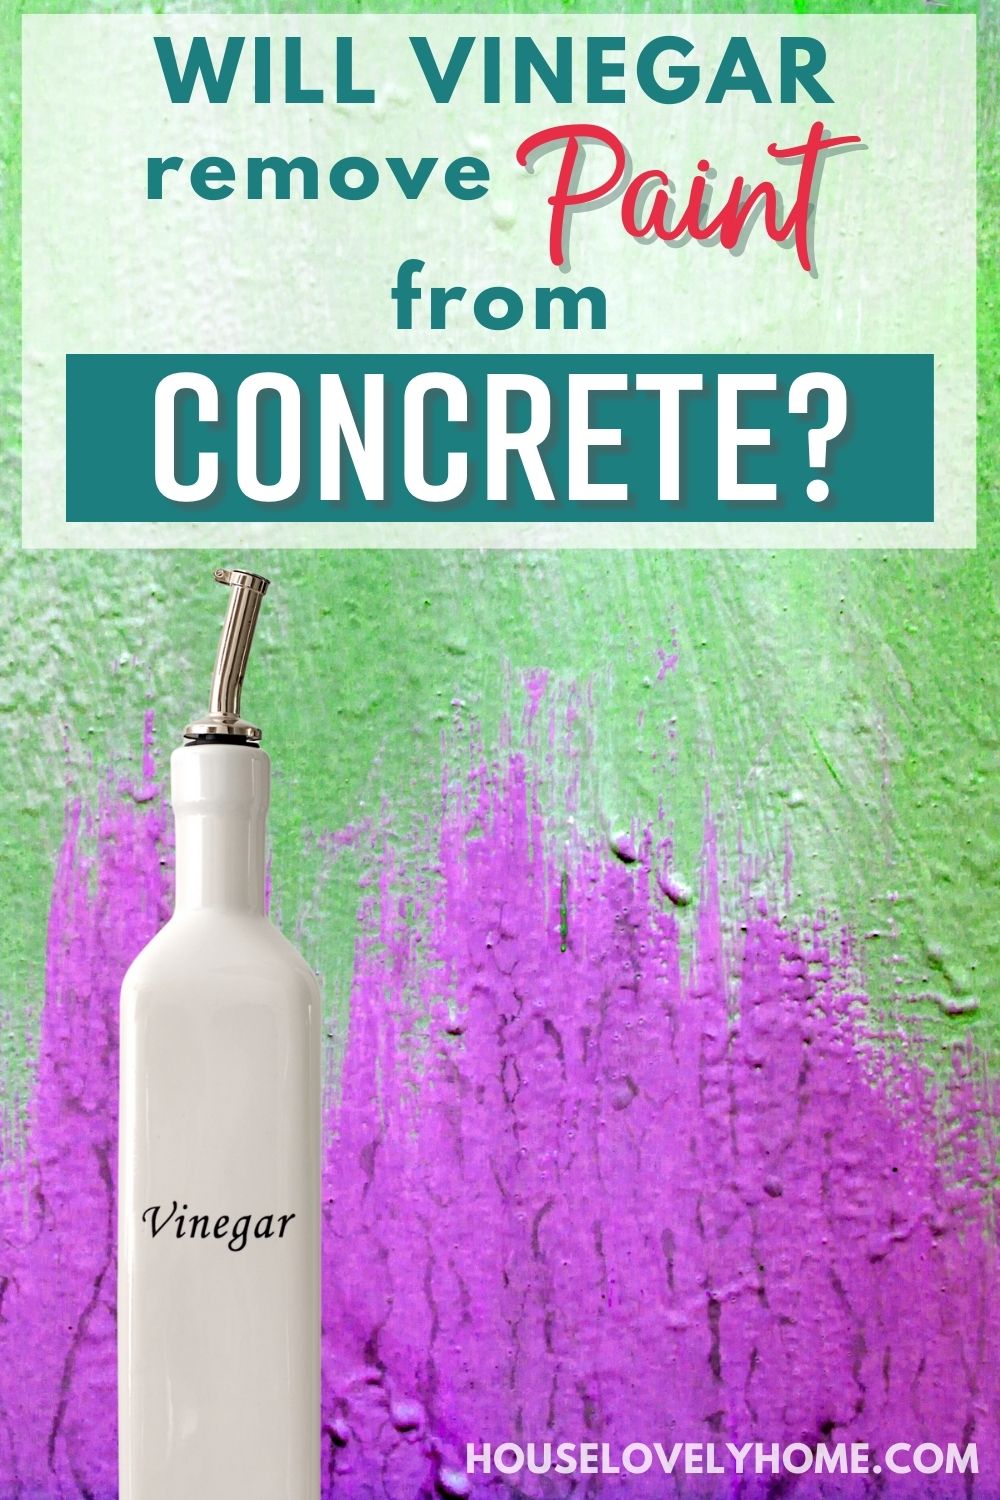 Photo of a concrete wall with green and purple paint a graphic overlay of a white bottle of vinegar with text overlay that reads Will Vinegar Remove Paint From Concrete